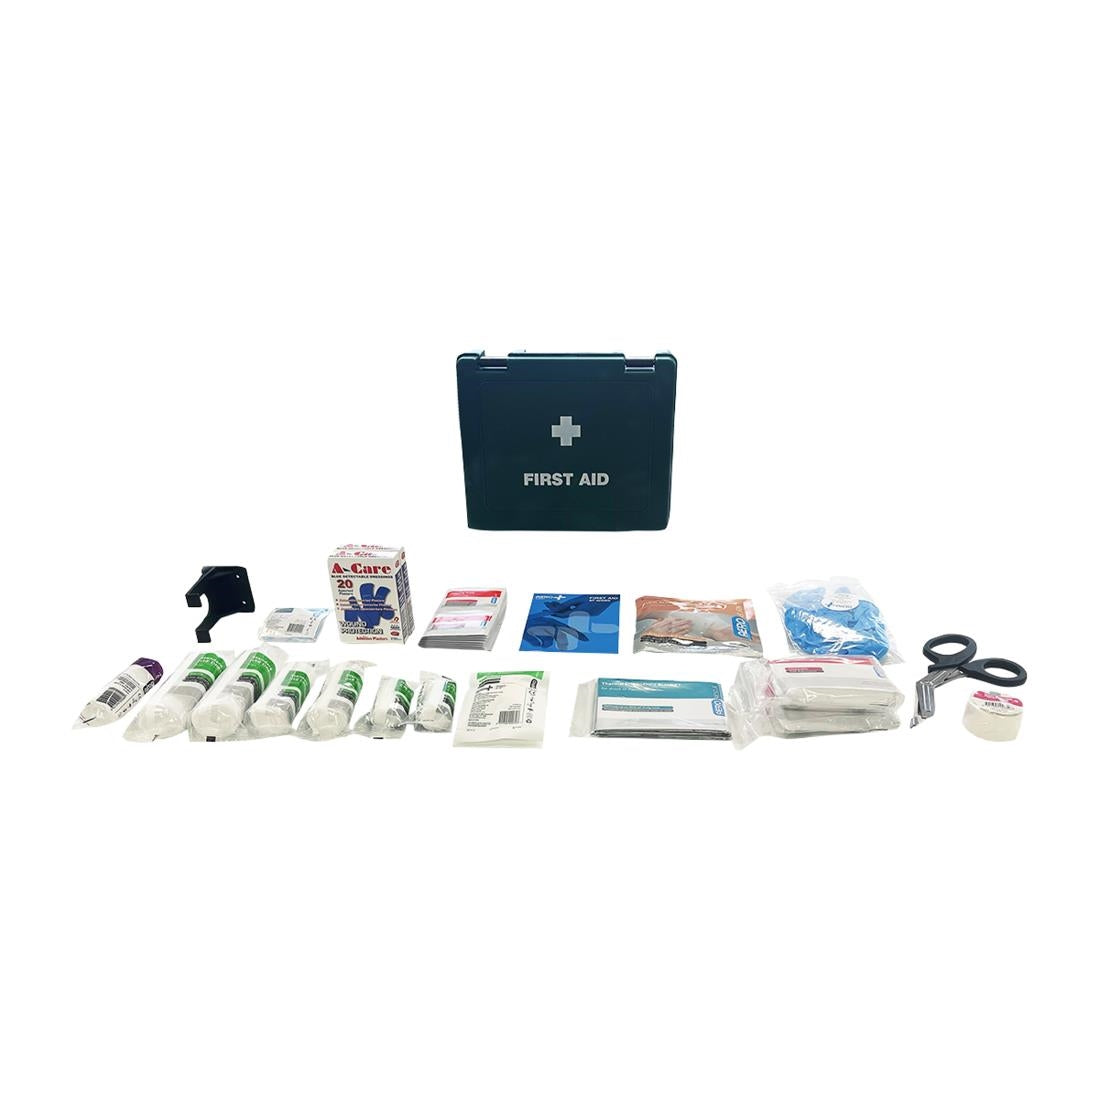 FT589 Aero Aerokit BS 8599 Small Catering First Aid Kit JD Catering Equipment Solutions Ltd